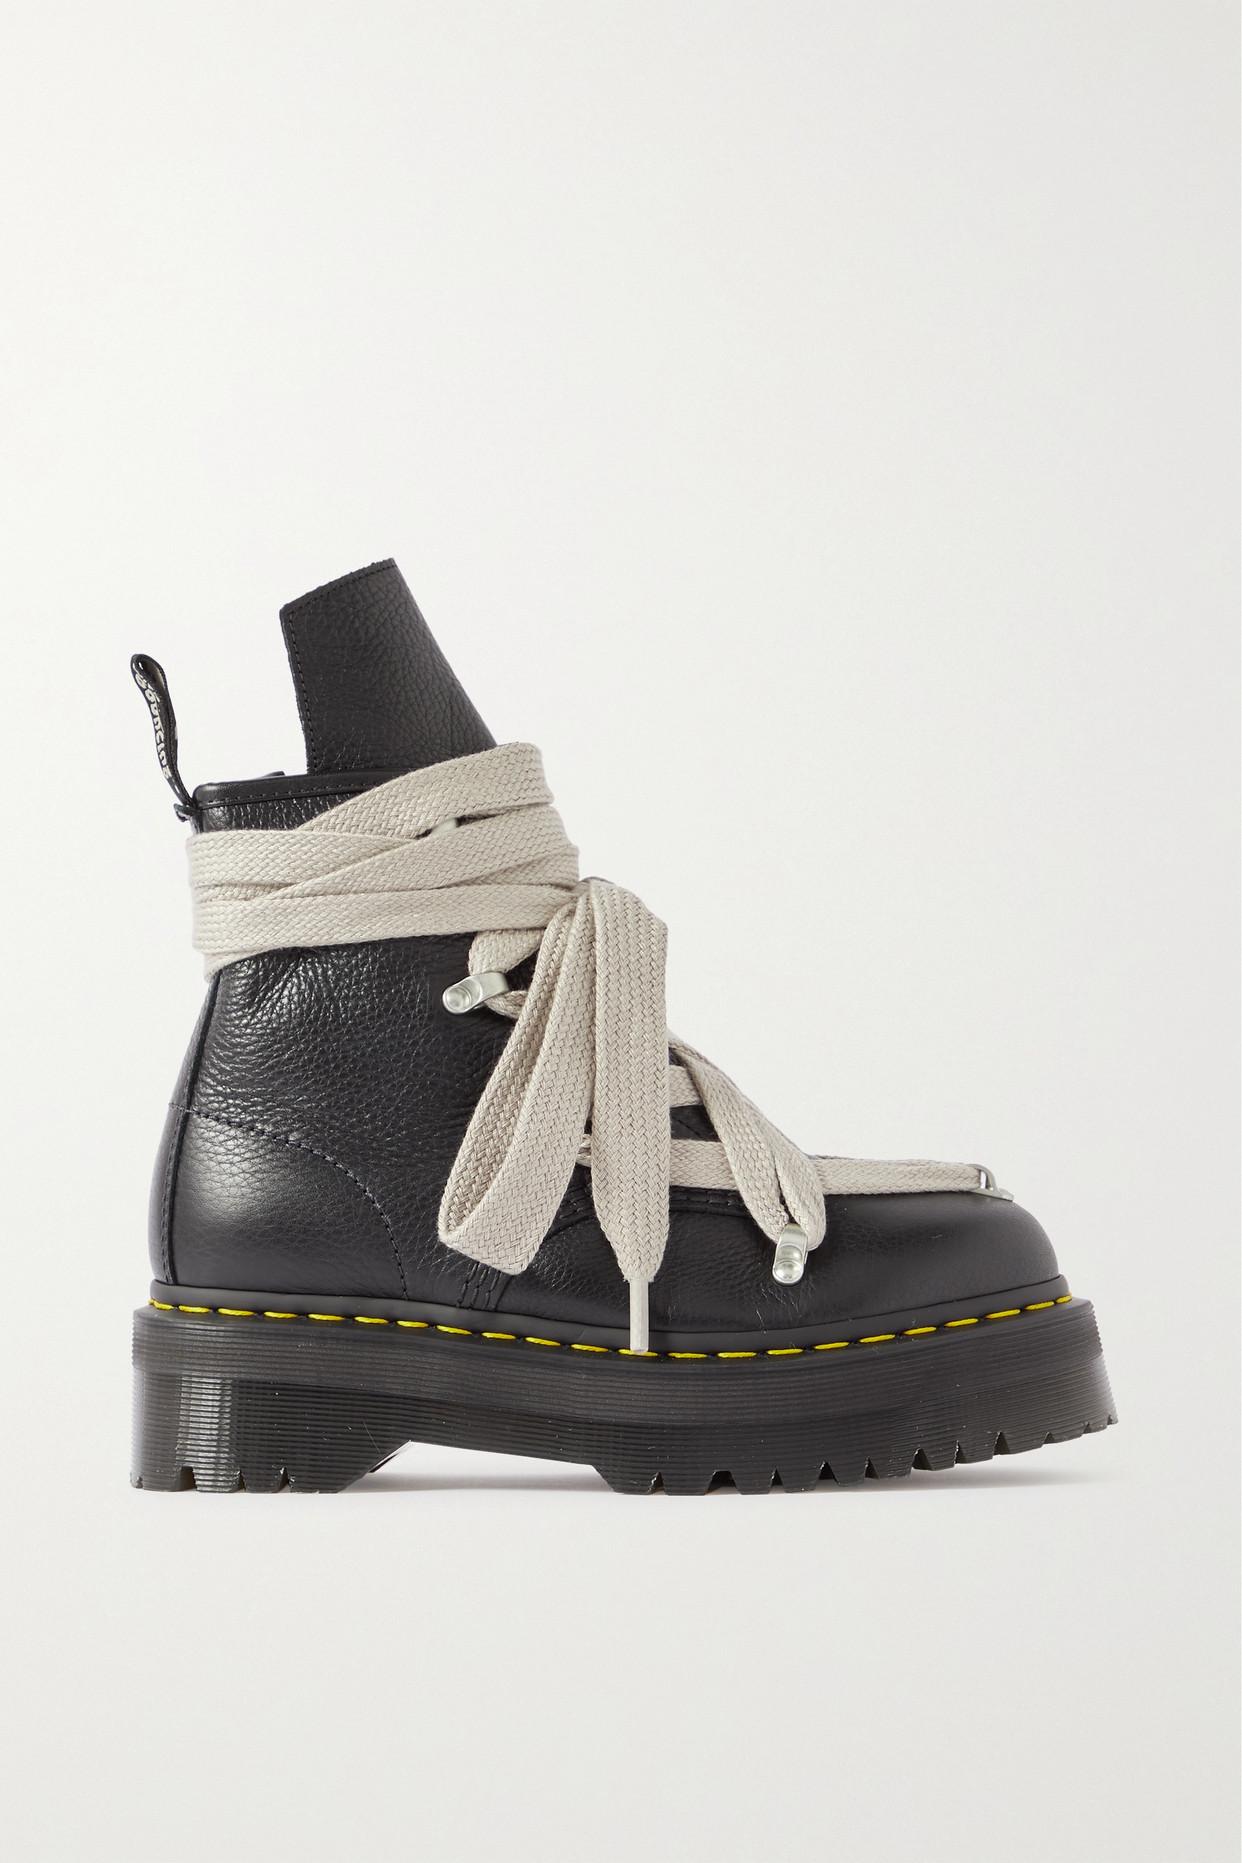 Rick Owens + Dr. Martens 1460 Bex Textured-leather Ankle Boots in